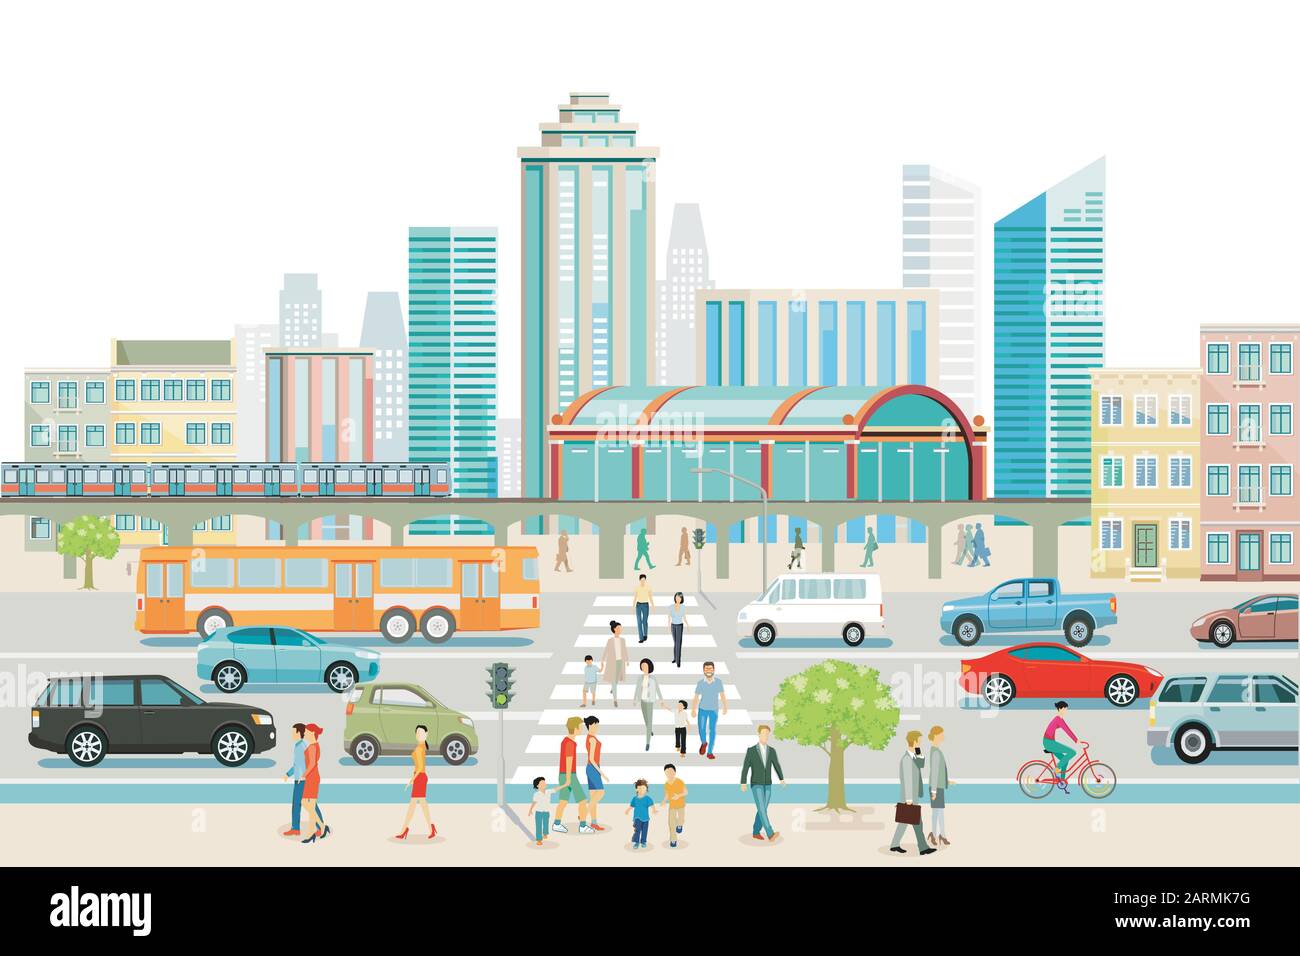 Big city with train station, bus, and pedestrian crossing Stock Vector